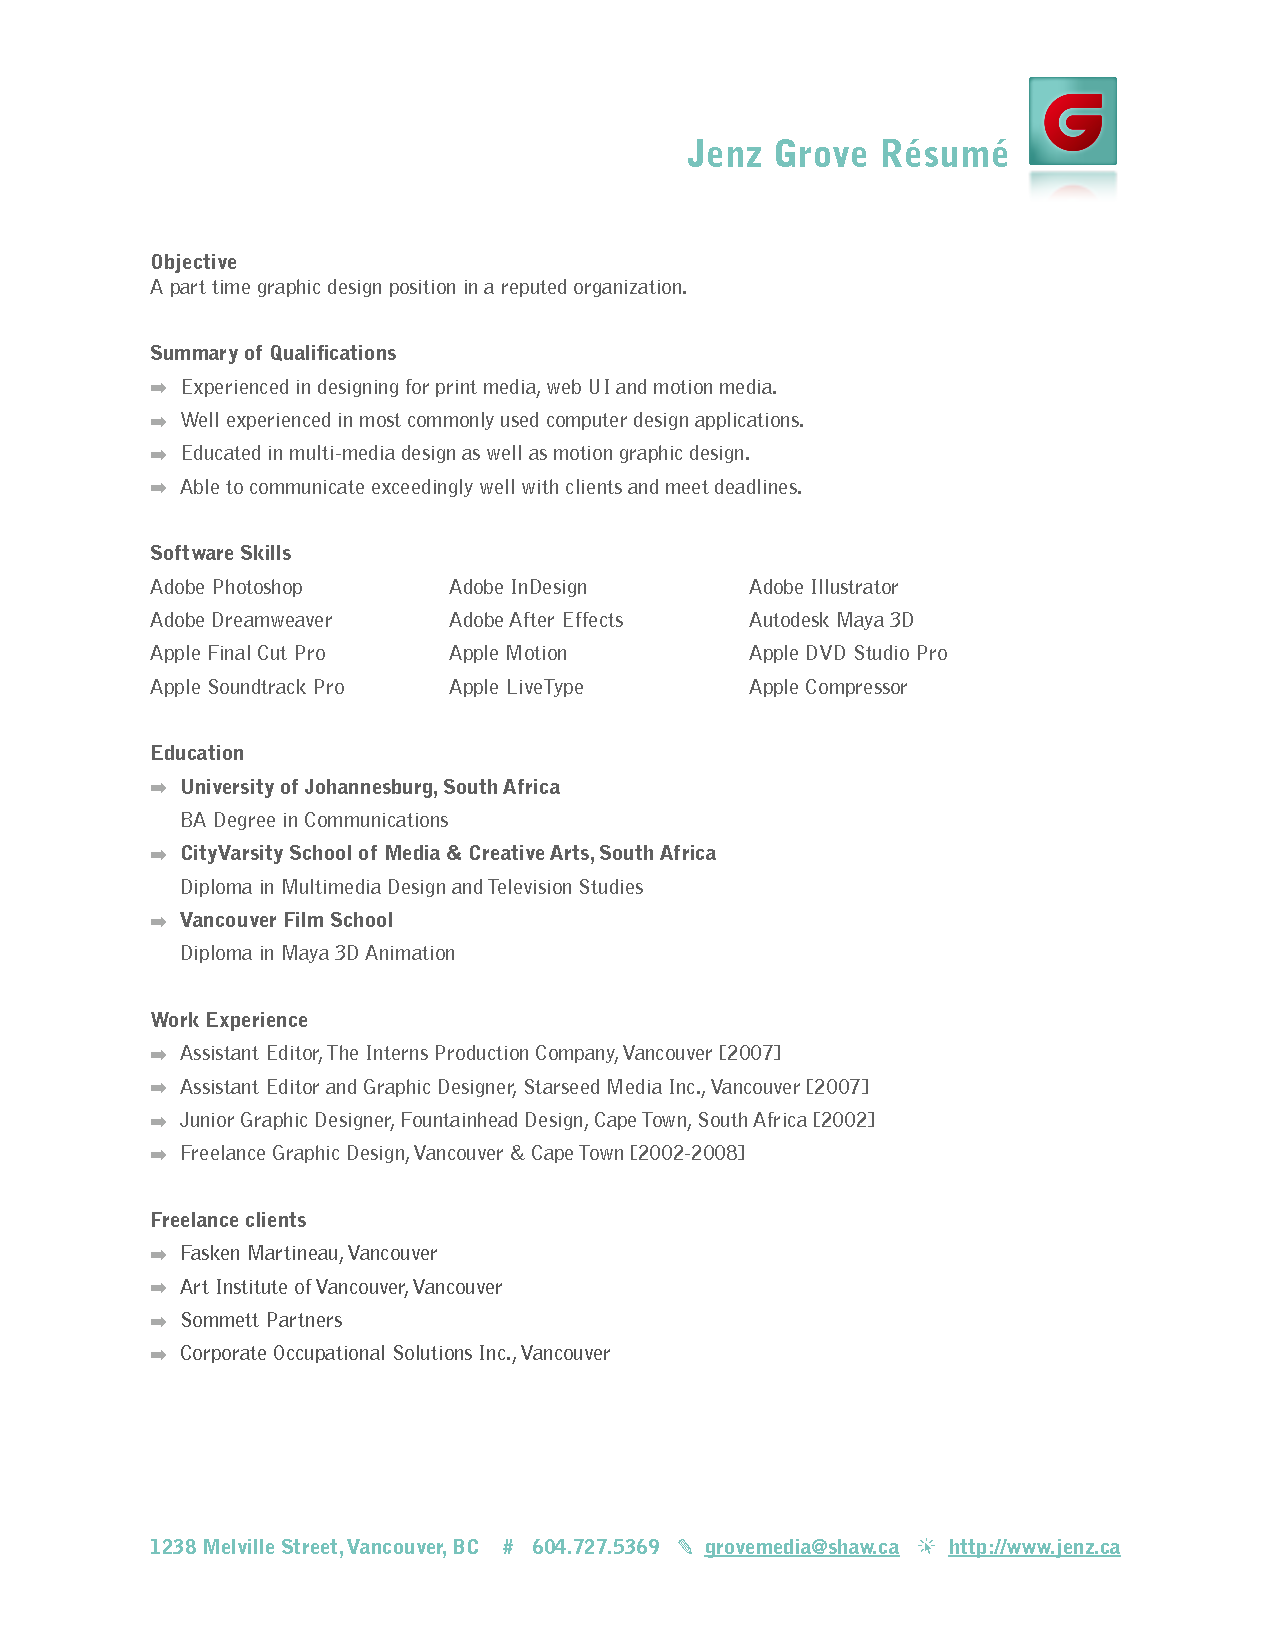 Part-Time Job Resume Objective